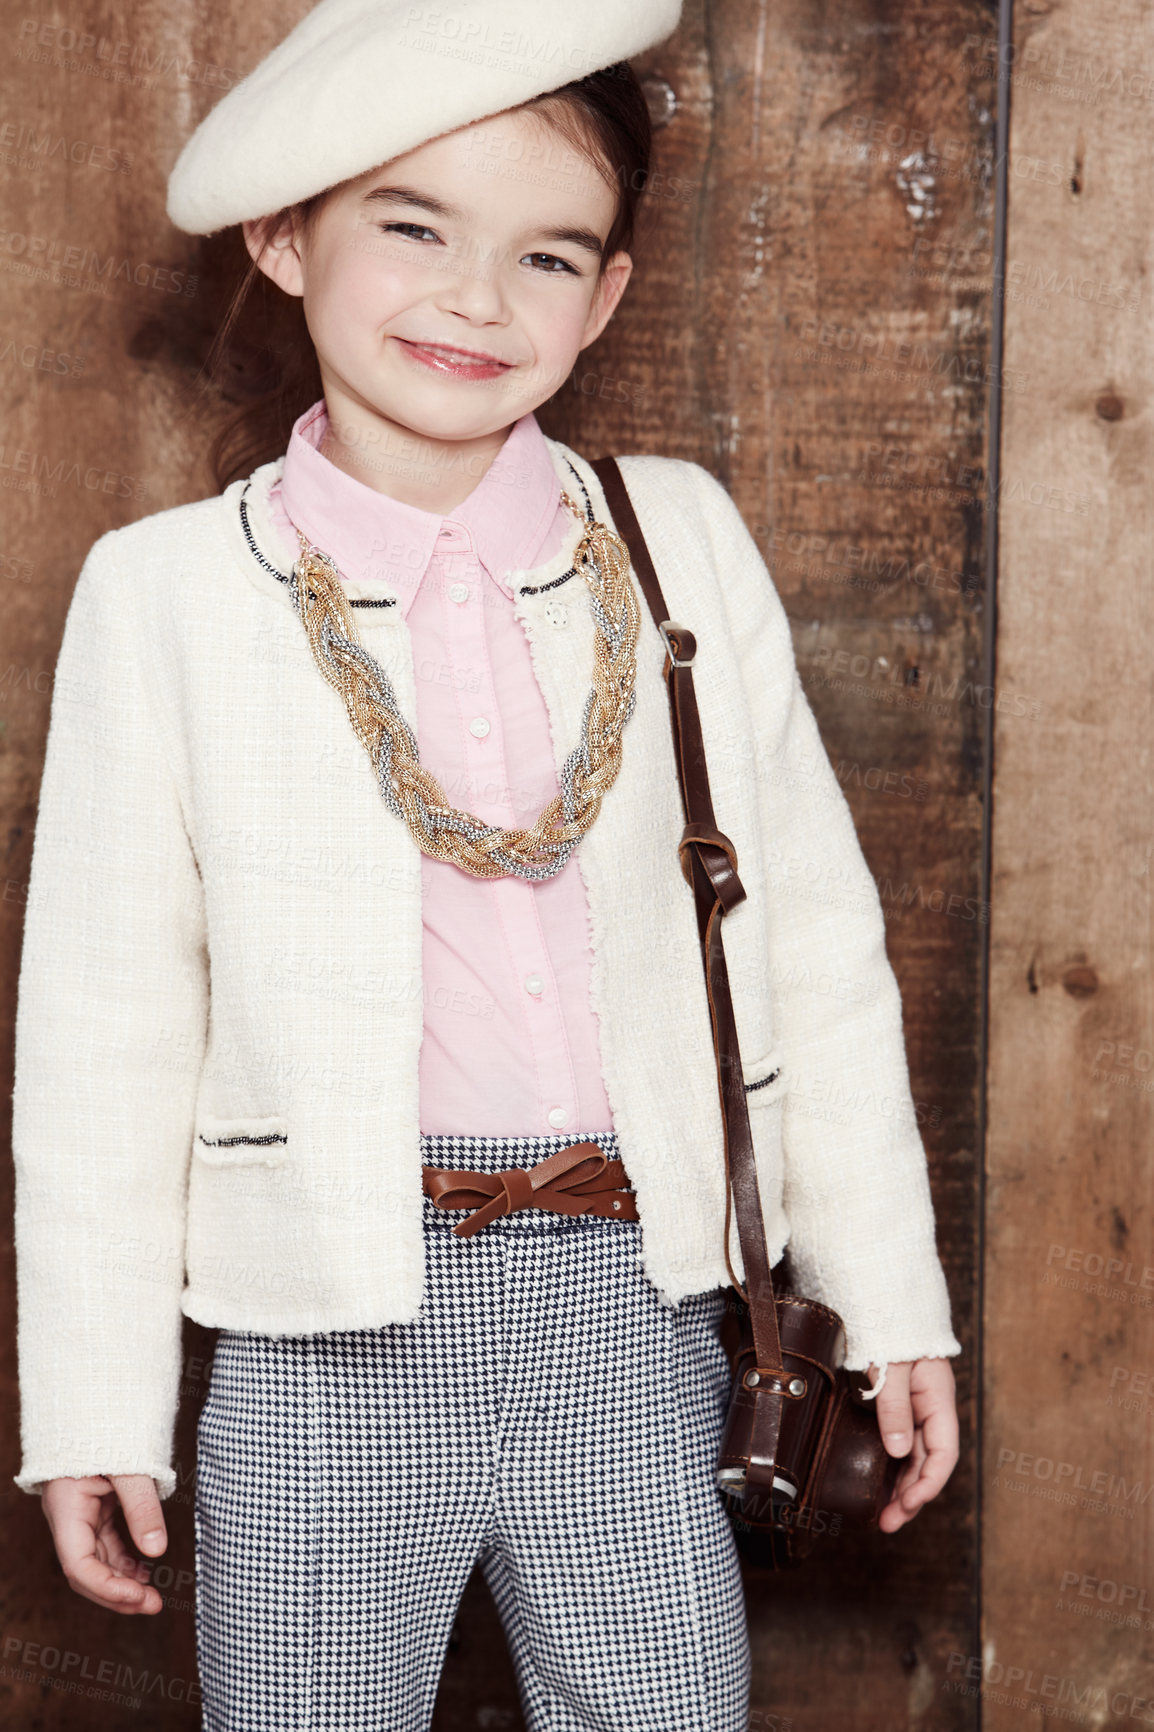 Buy stock photo Vintage, girl and portrait of child with fashion, style and happy in clothes on wood background or studio. Kid, smile and confidence in retro aesthetic or costume with hat, jewellery and bag 